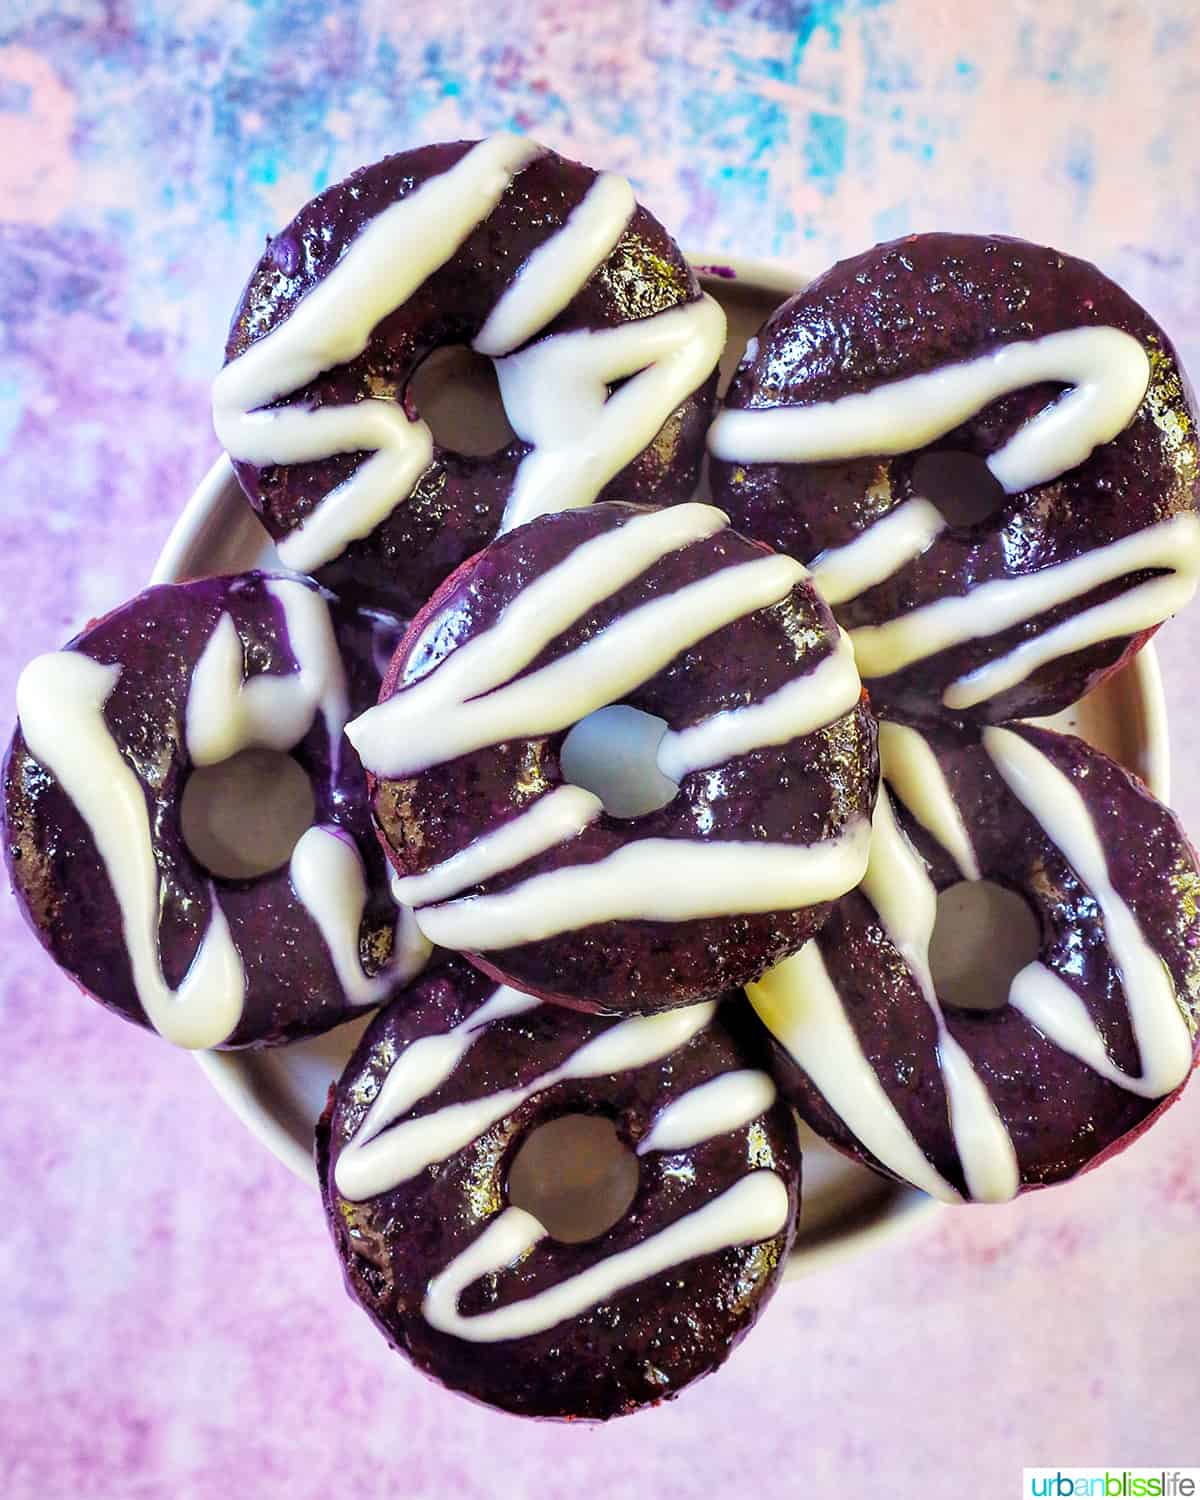 several ube donuts with ube glaze and white glaze drizzle on a purple and blue background.